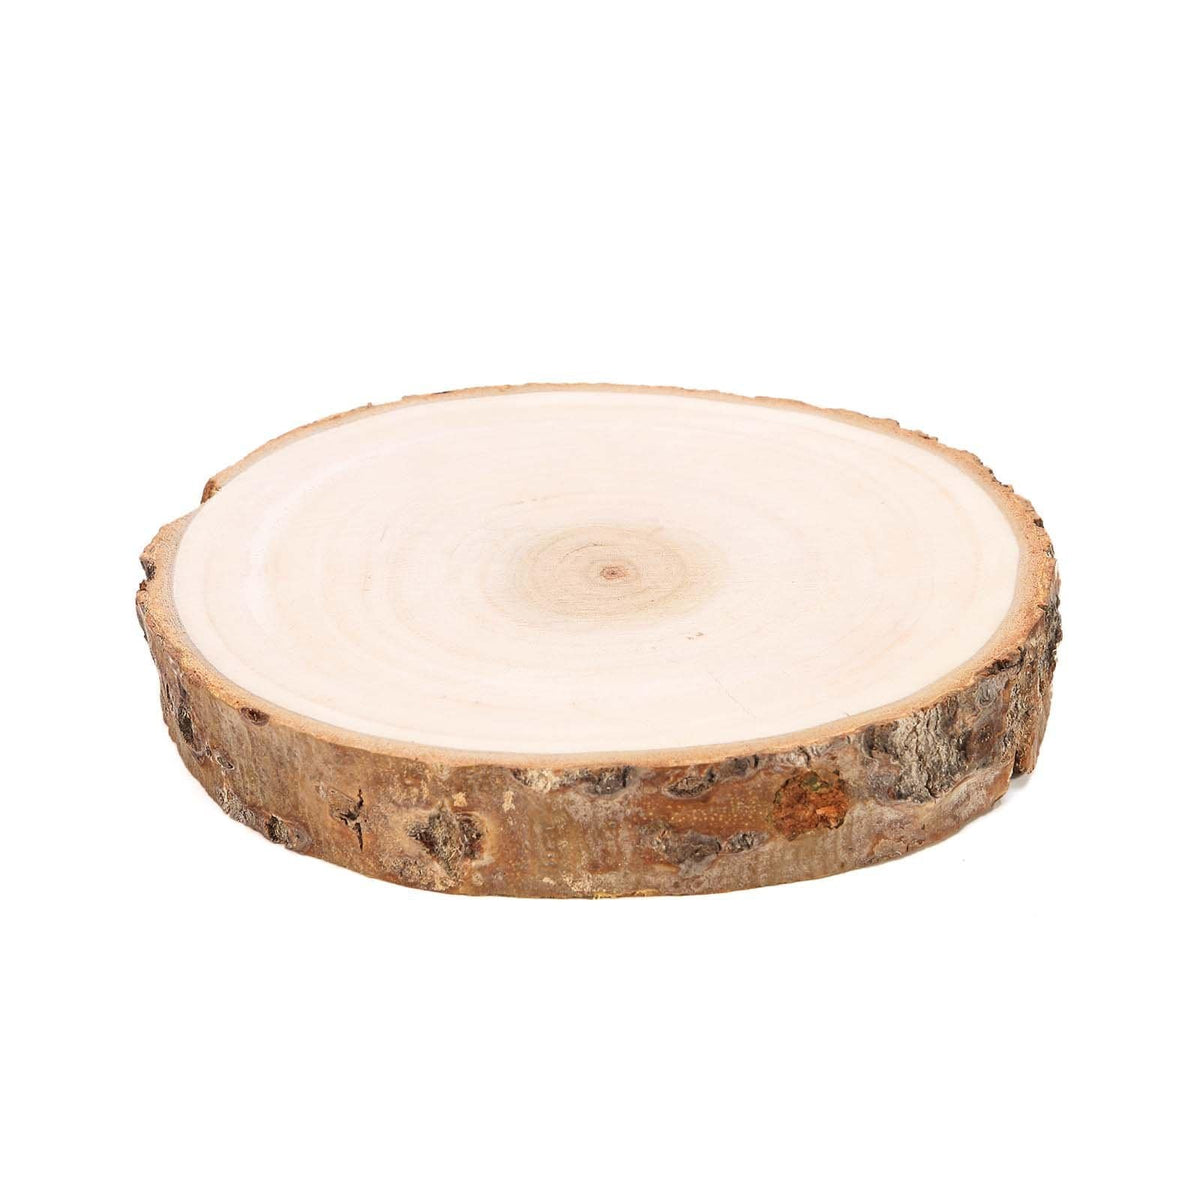 Richland Basswood Tree Slice with Bark 8\-12\ Natural, Men's, Size: One Size